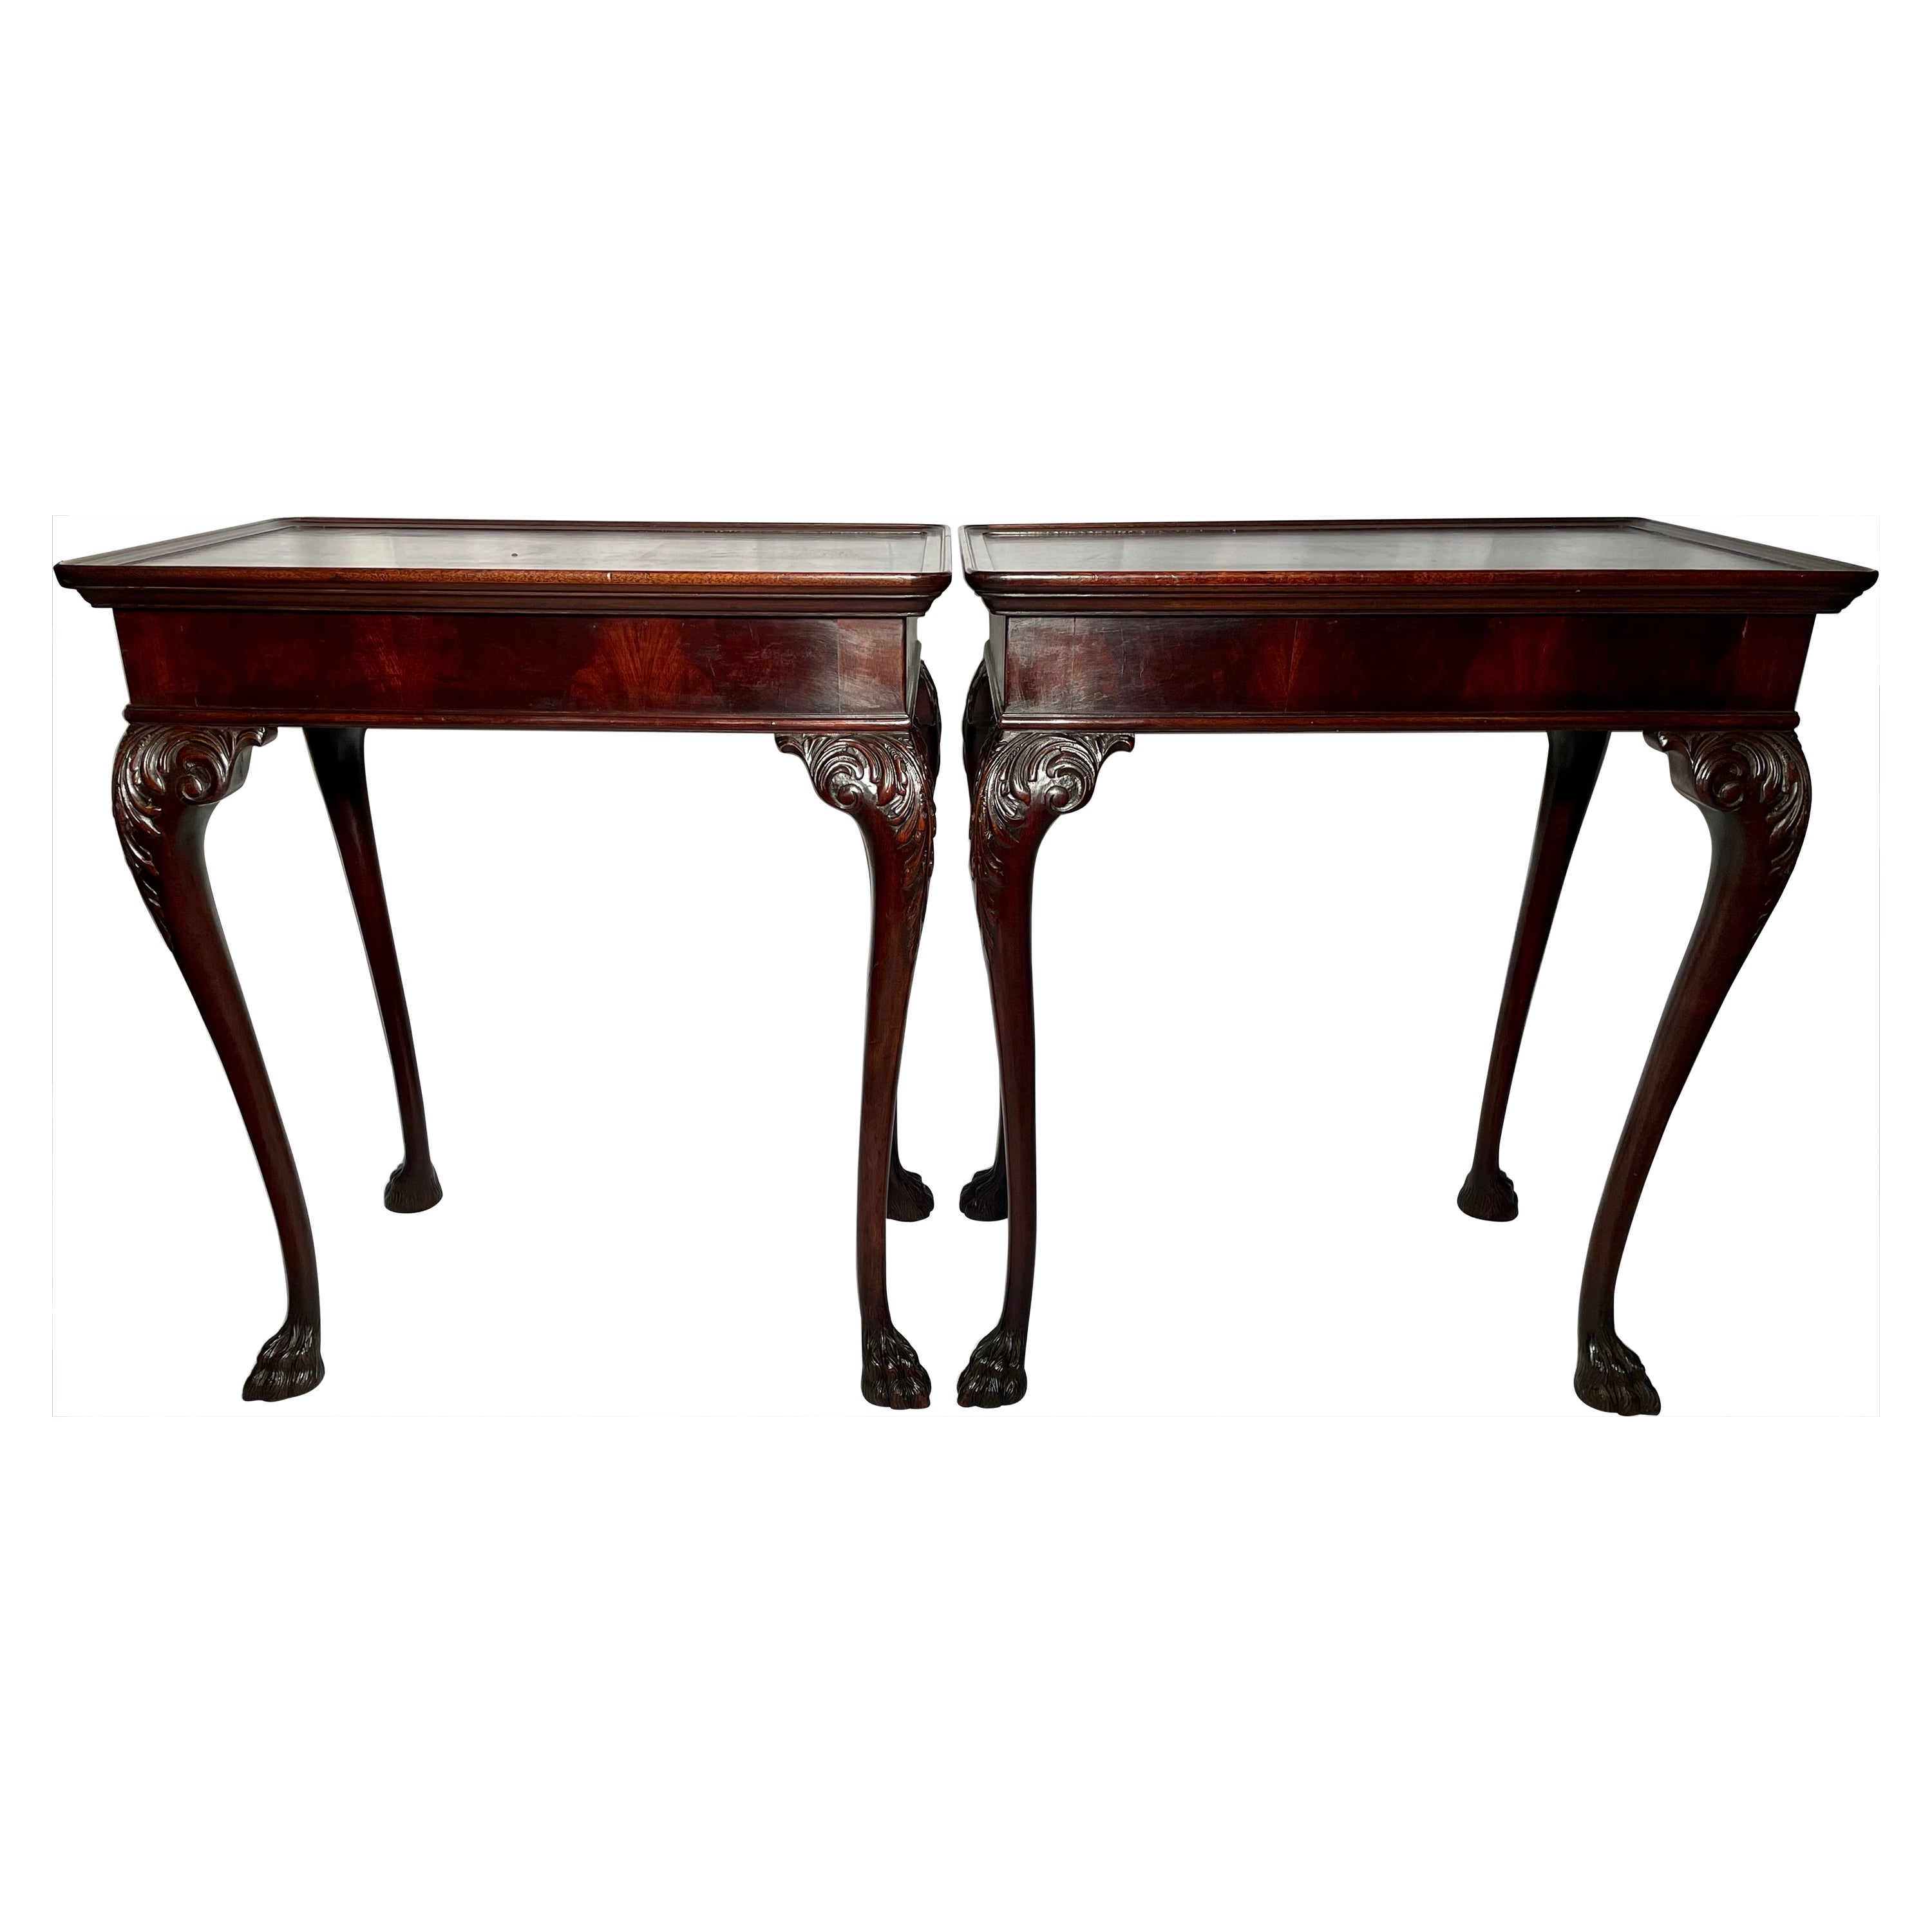 Pair Antique English Chippendale Carved Mahogany Side Tables, circa 1890s